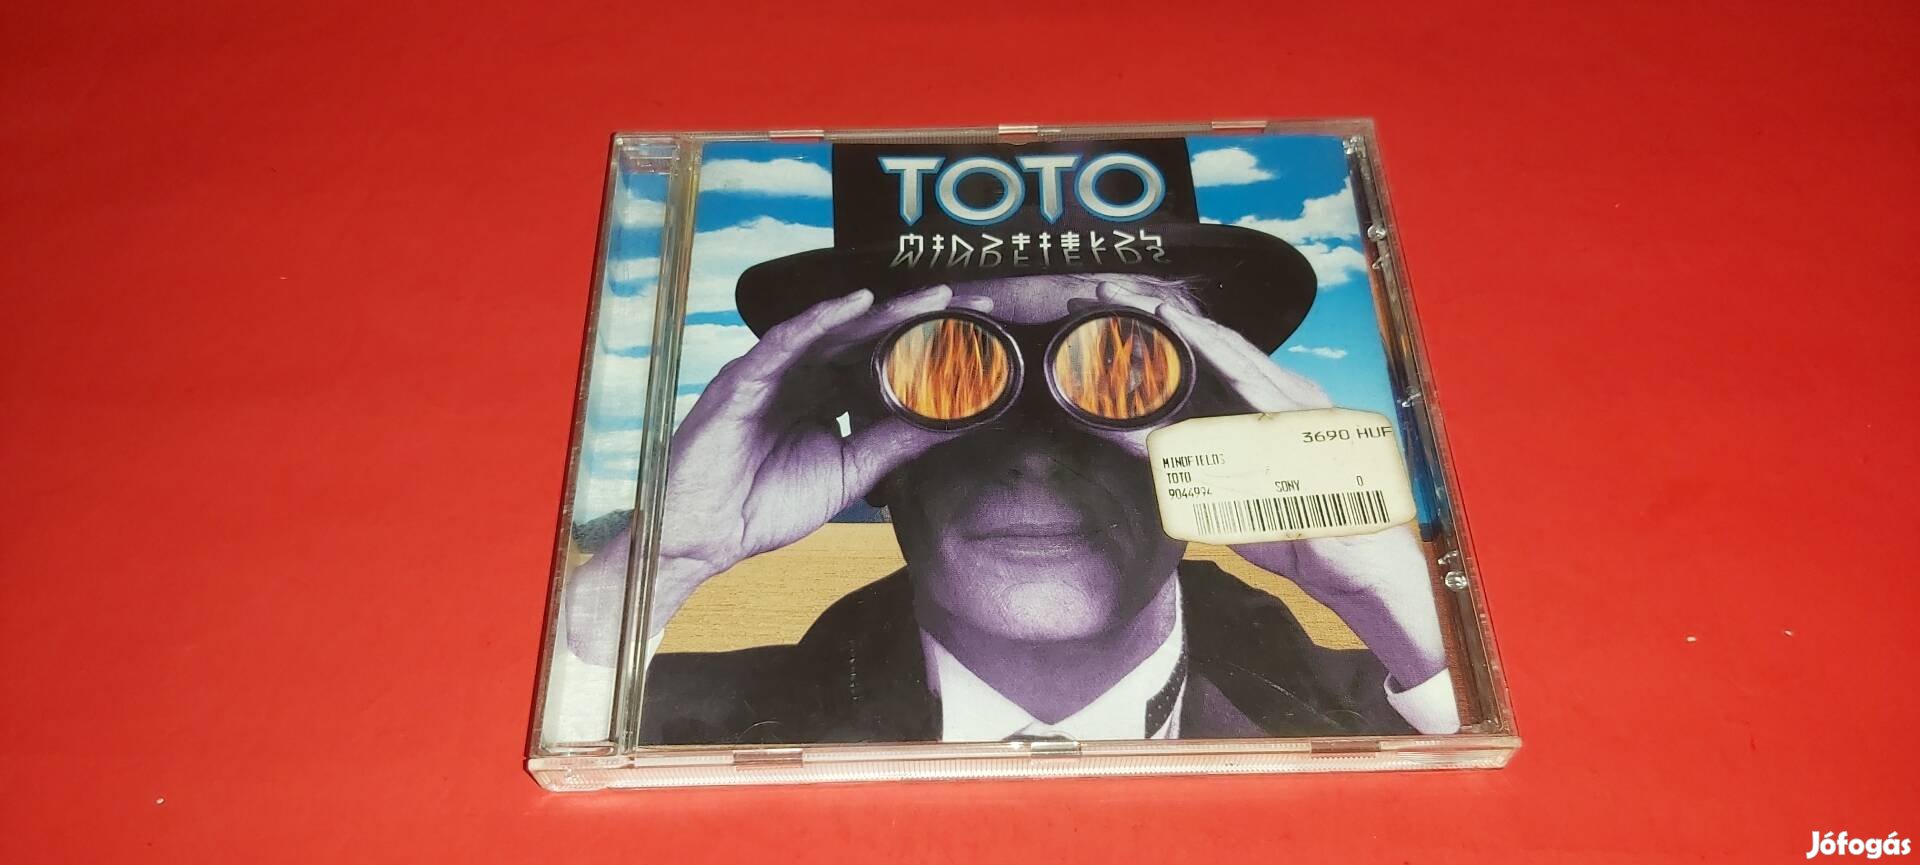 Toto Mindfields Cd 1999